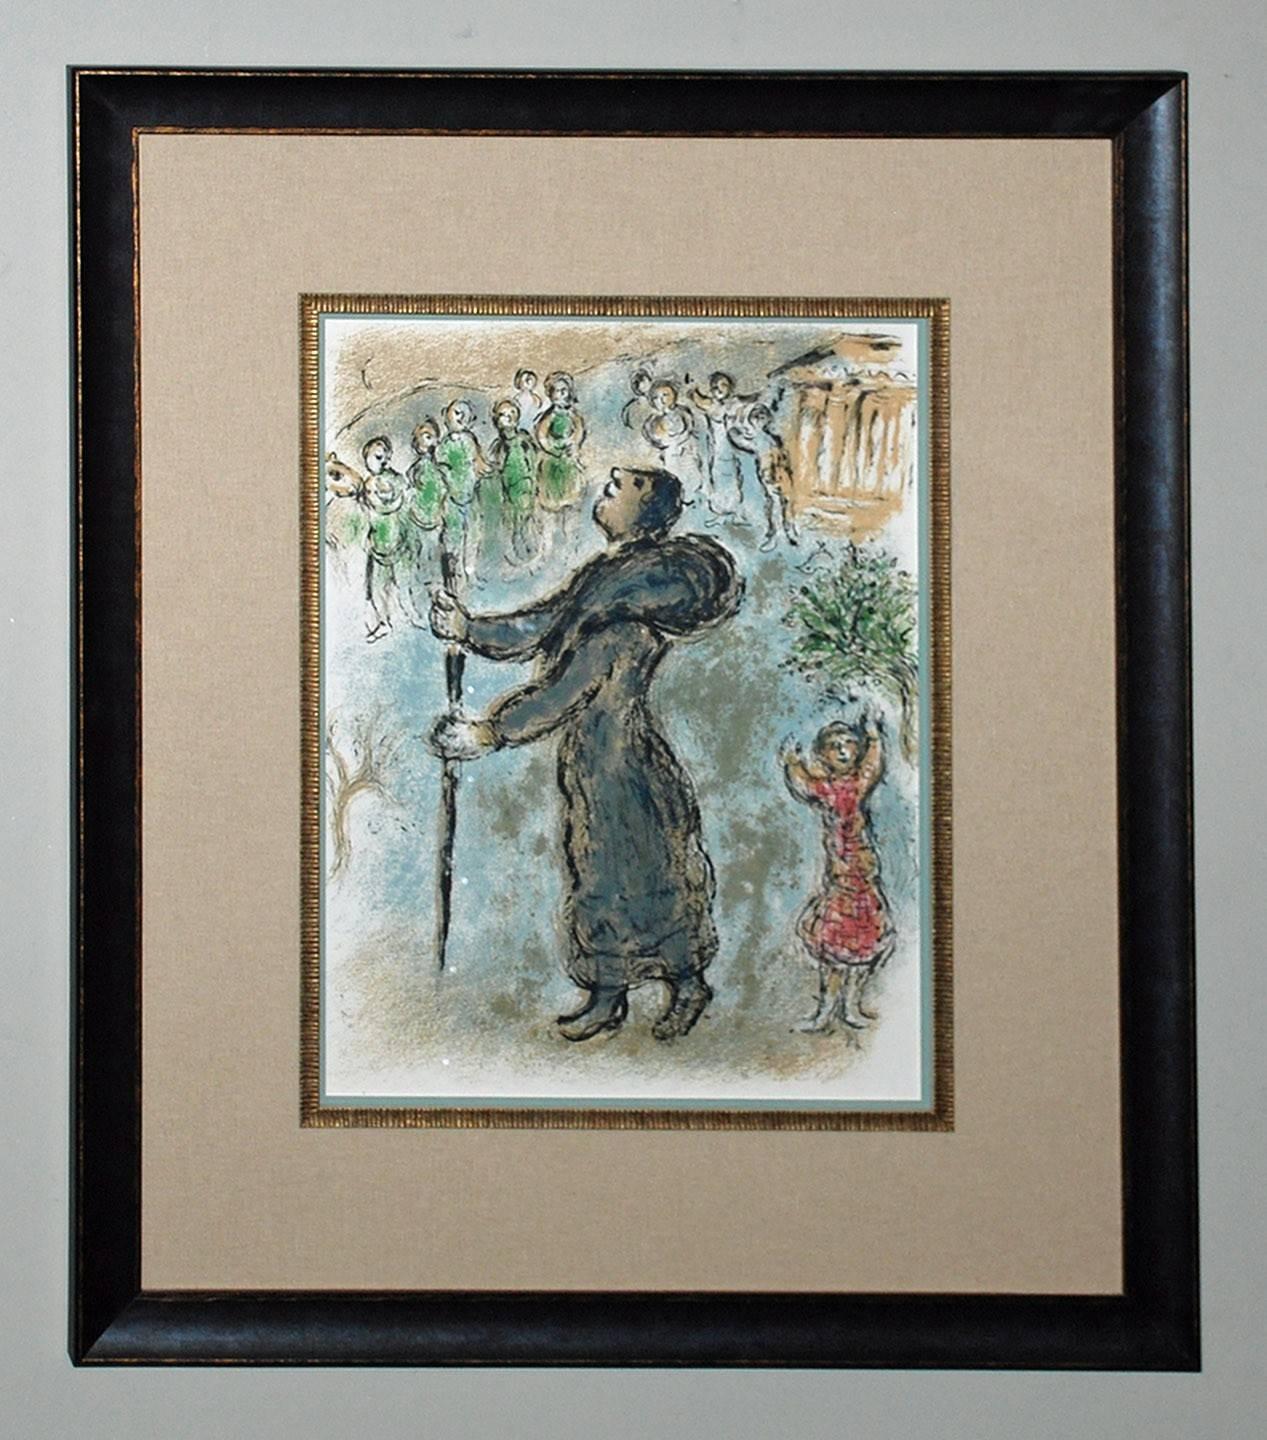 Ulysses Disguised as a Beggar, from The Odyssey, Volume II - Print by Marc Chagall